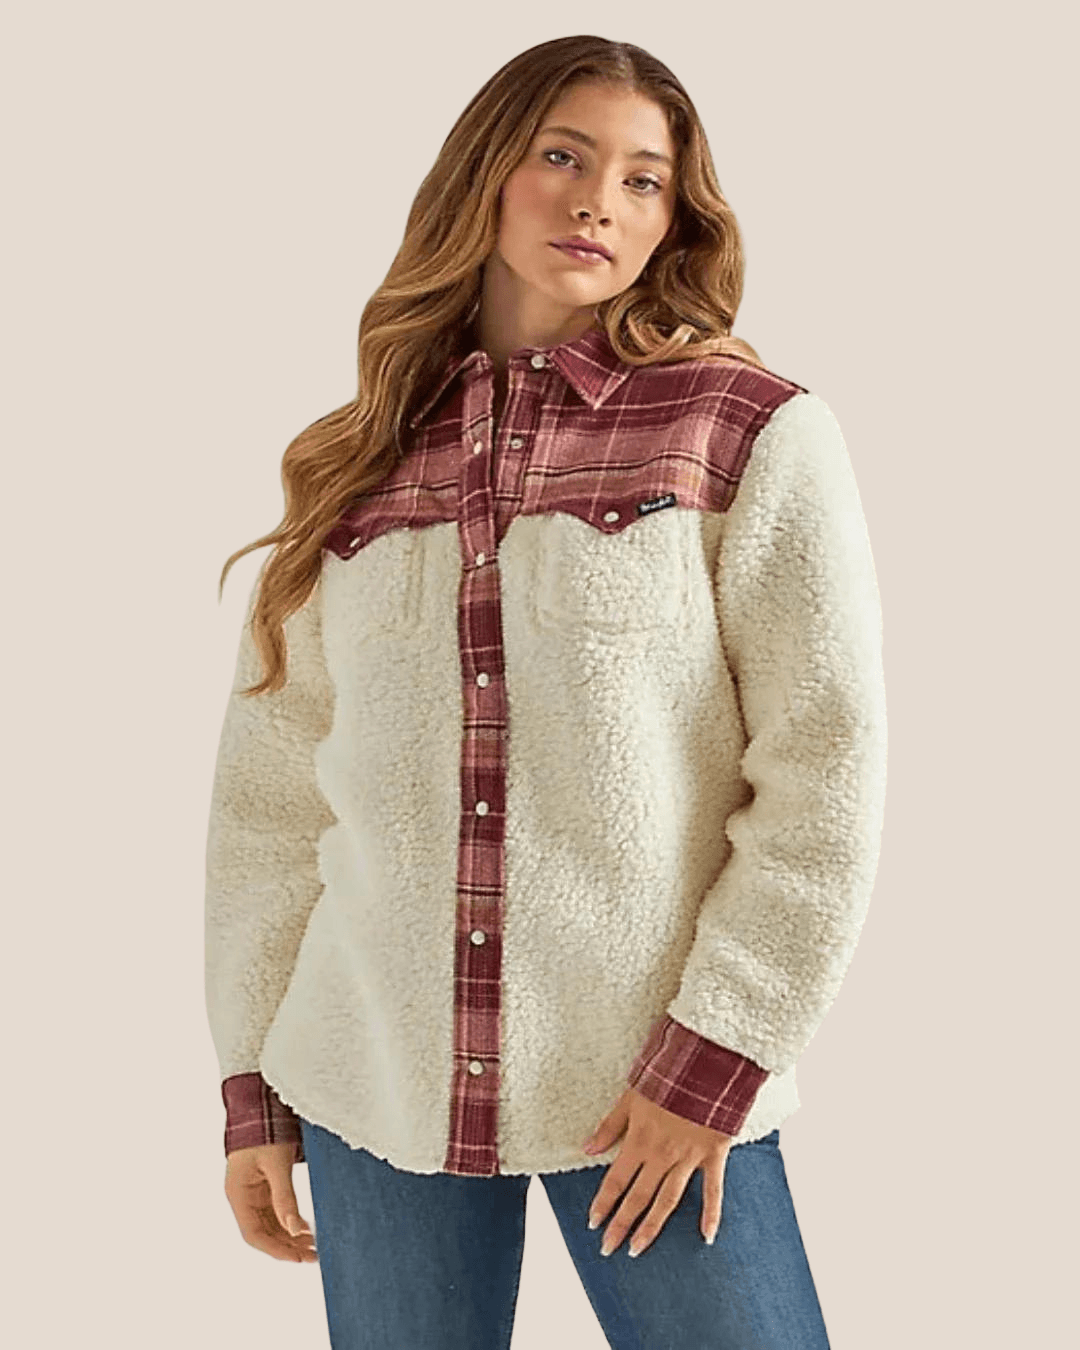 Women’s Western Outerwear - Coats, Jackets, and Vests - Painted Cowgirl Western Store